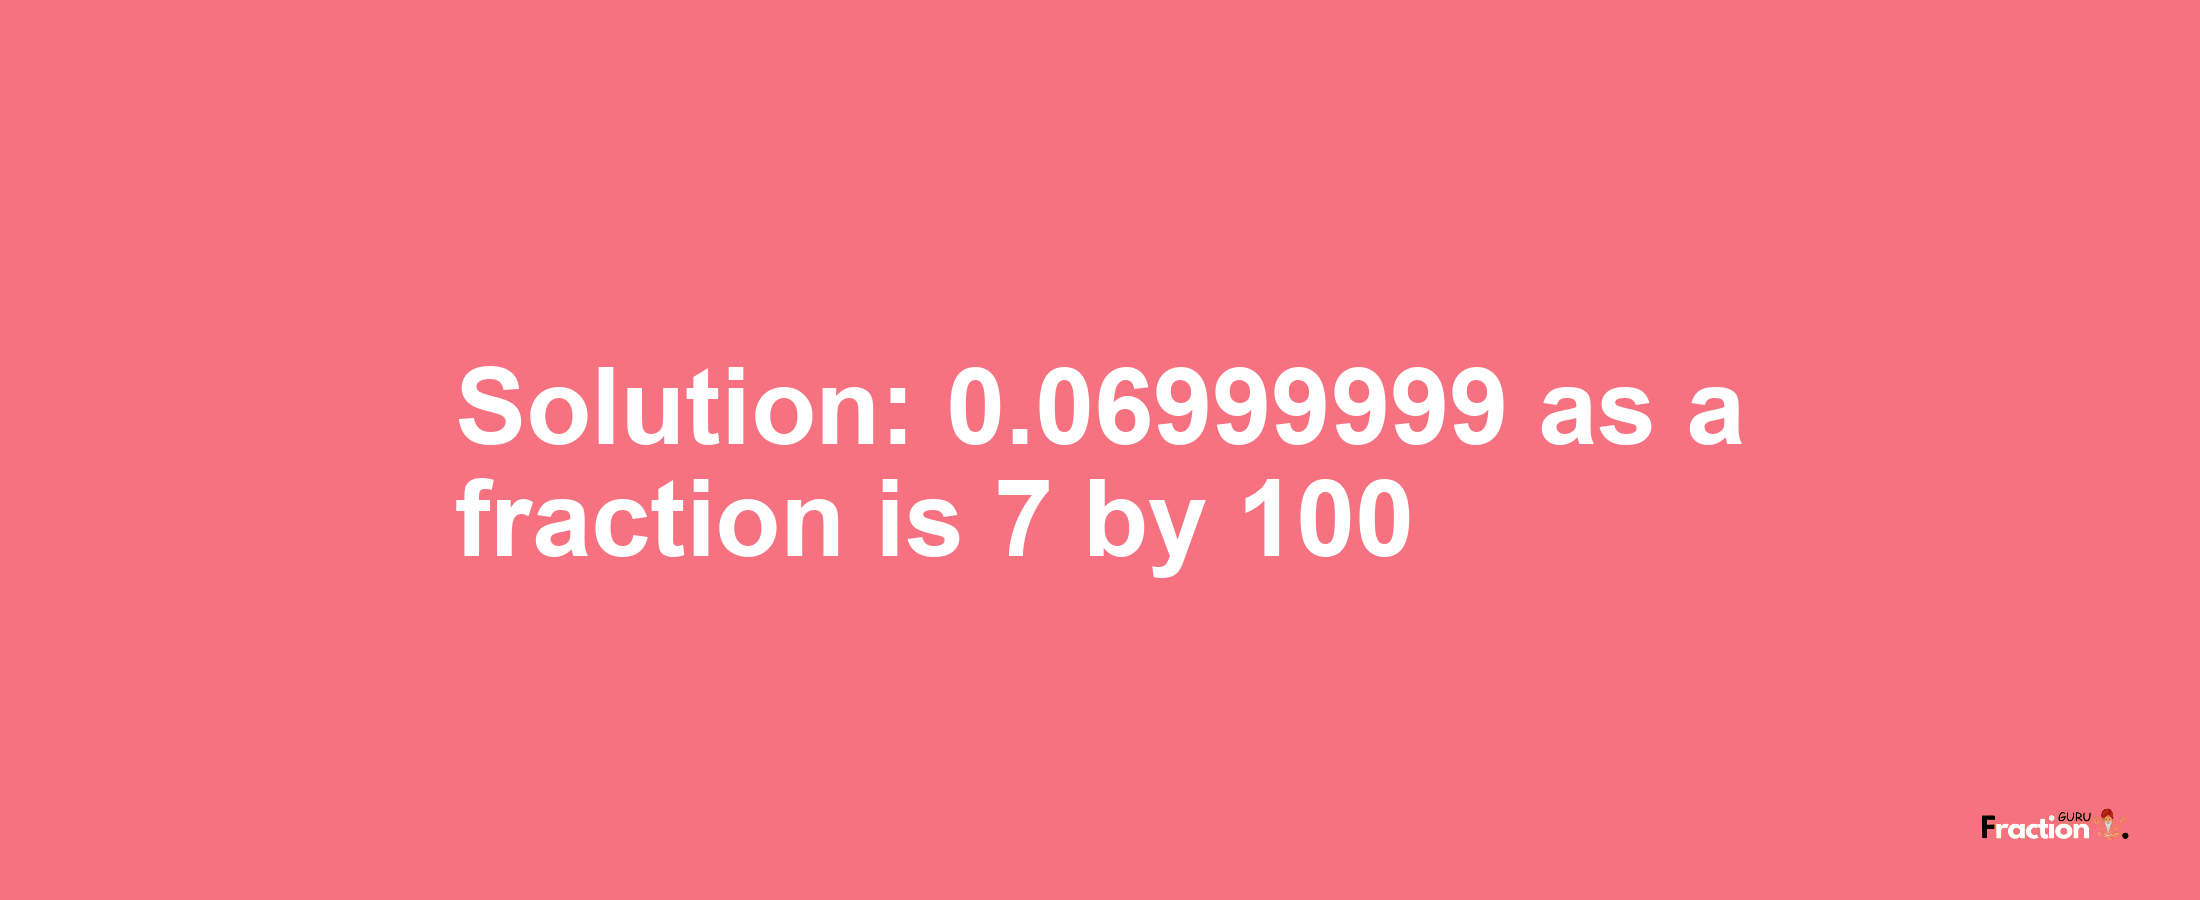 Solution:0.06999999 as a fraction is 7/100